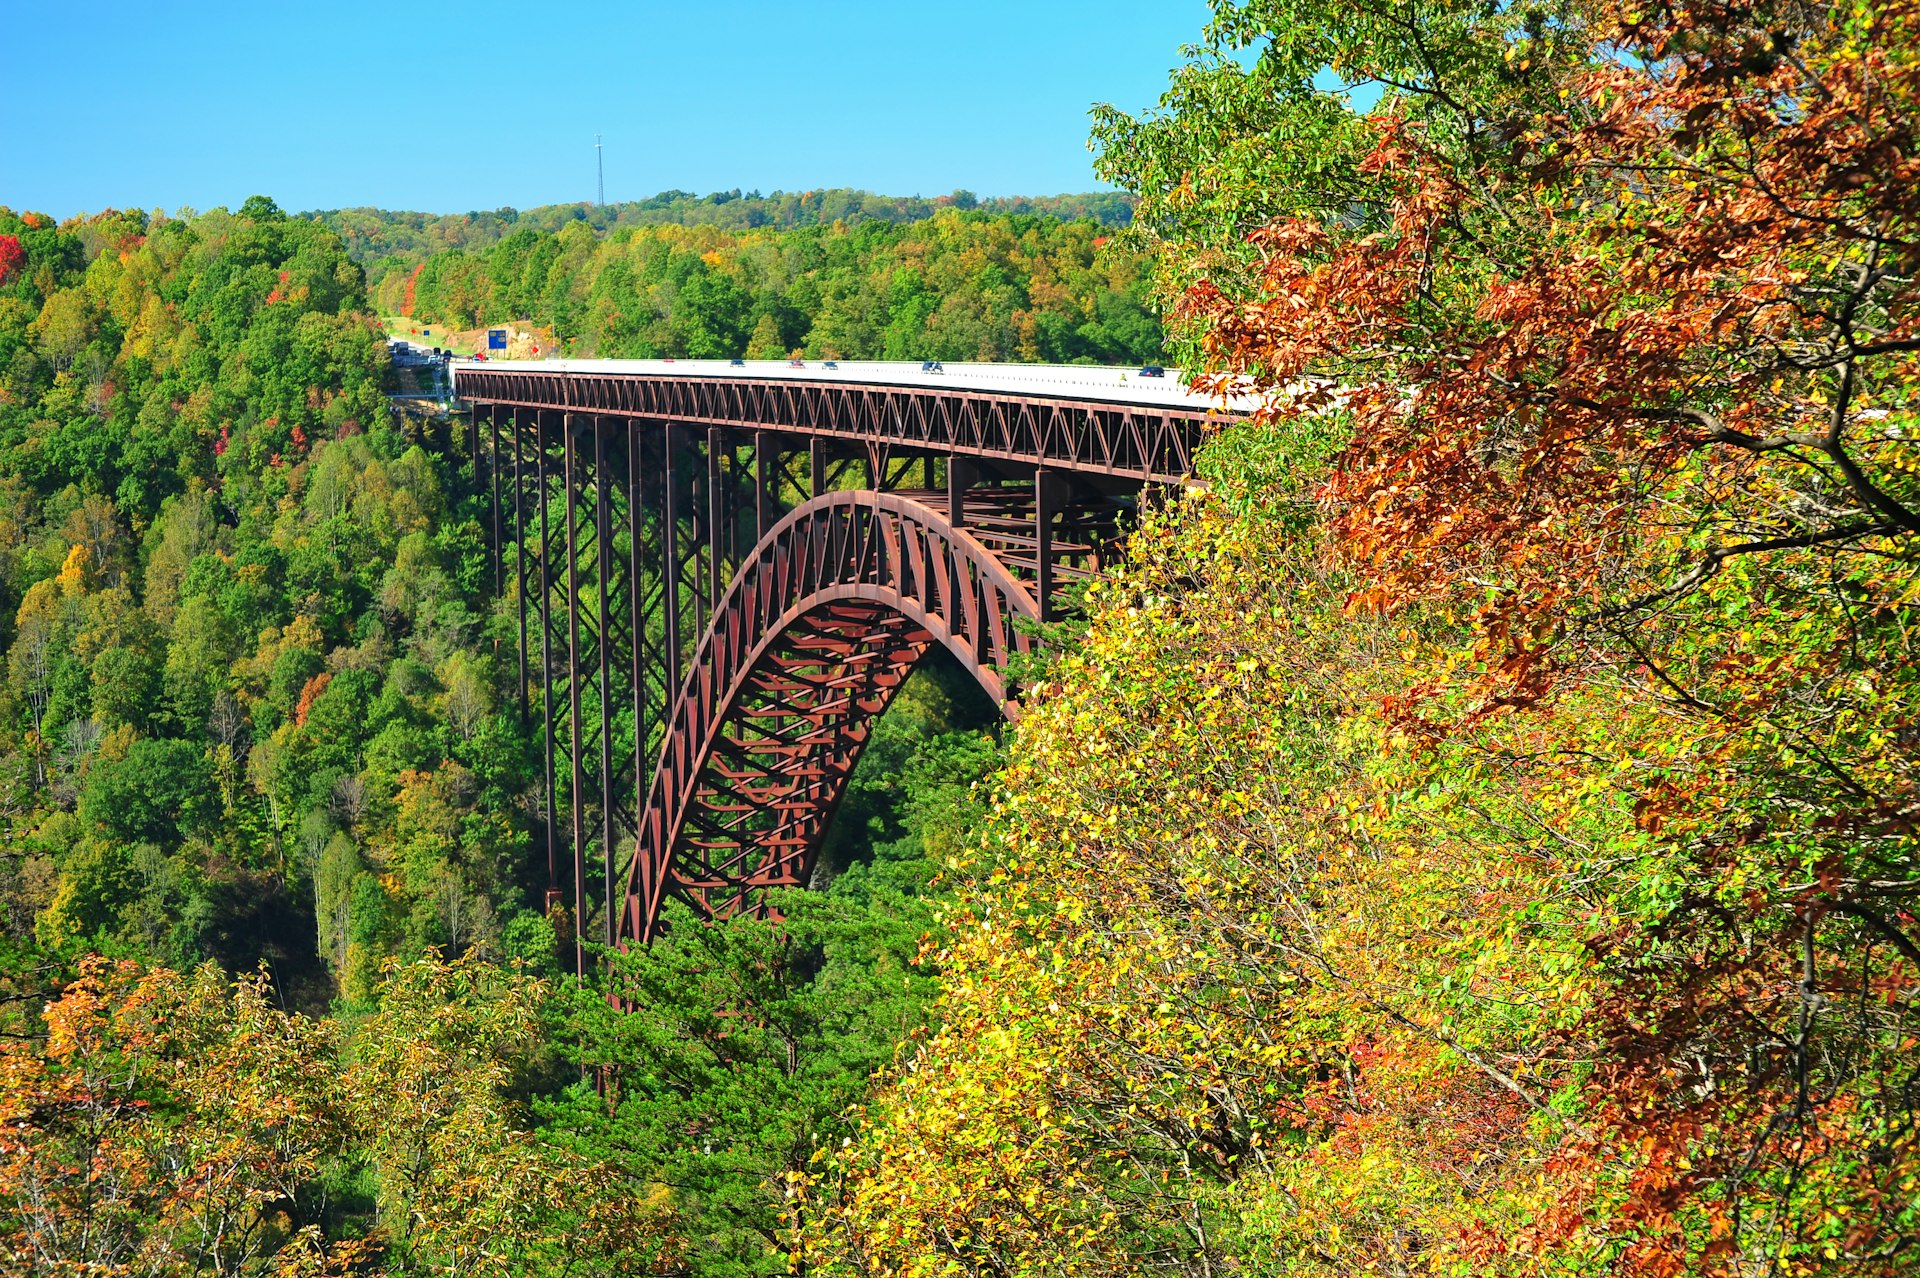 New River Gorge Bridge, seen between greenery and foliage beginning to turn colors